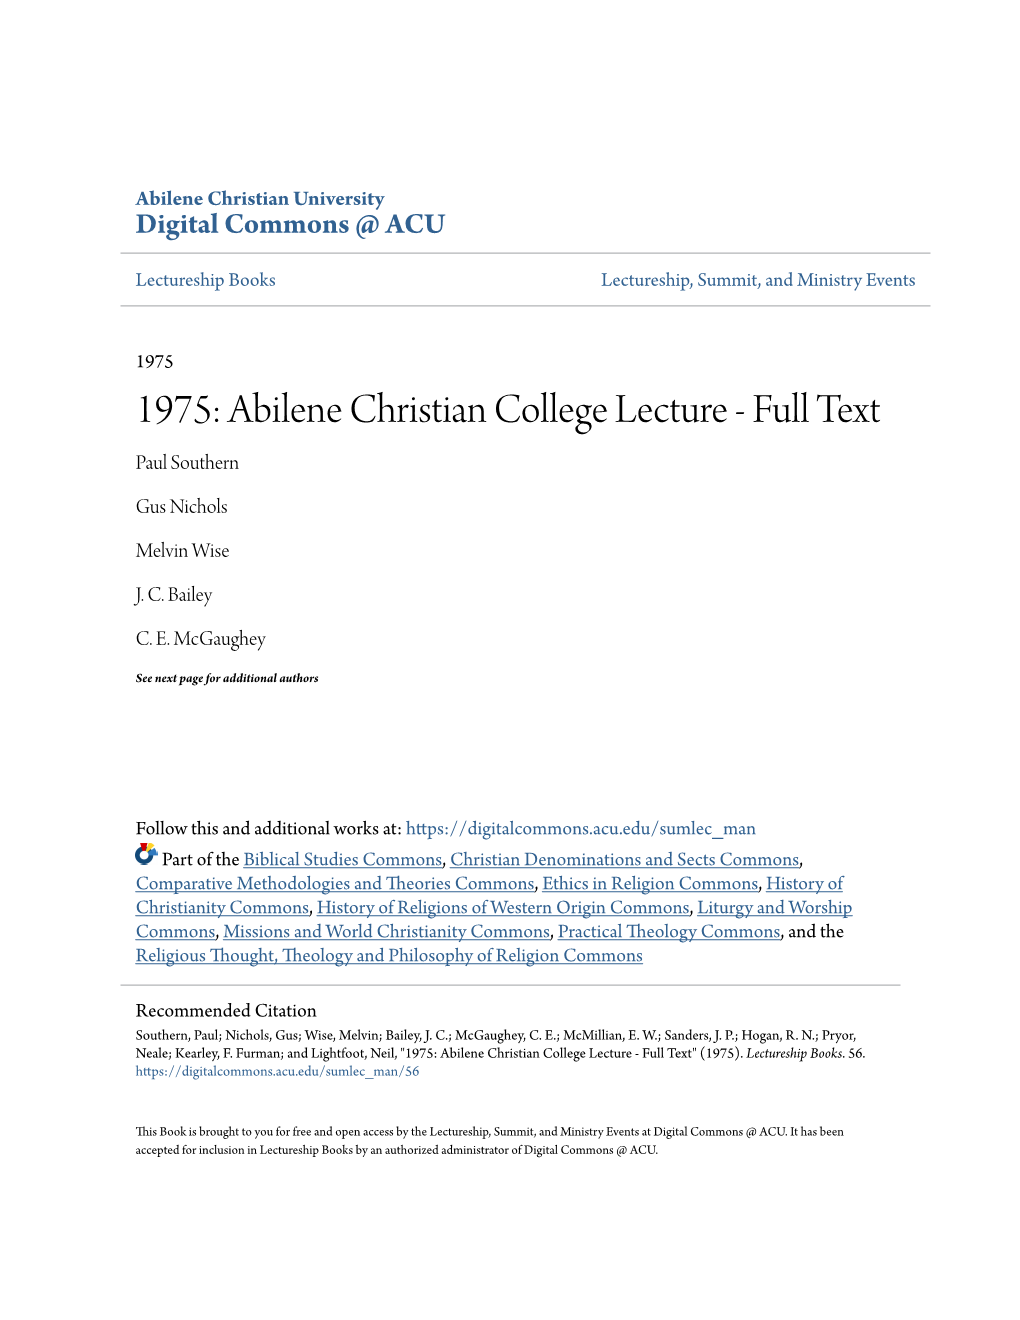 Abilene Christian College Lecture - Full Text Paul Southern